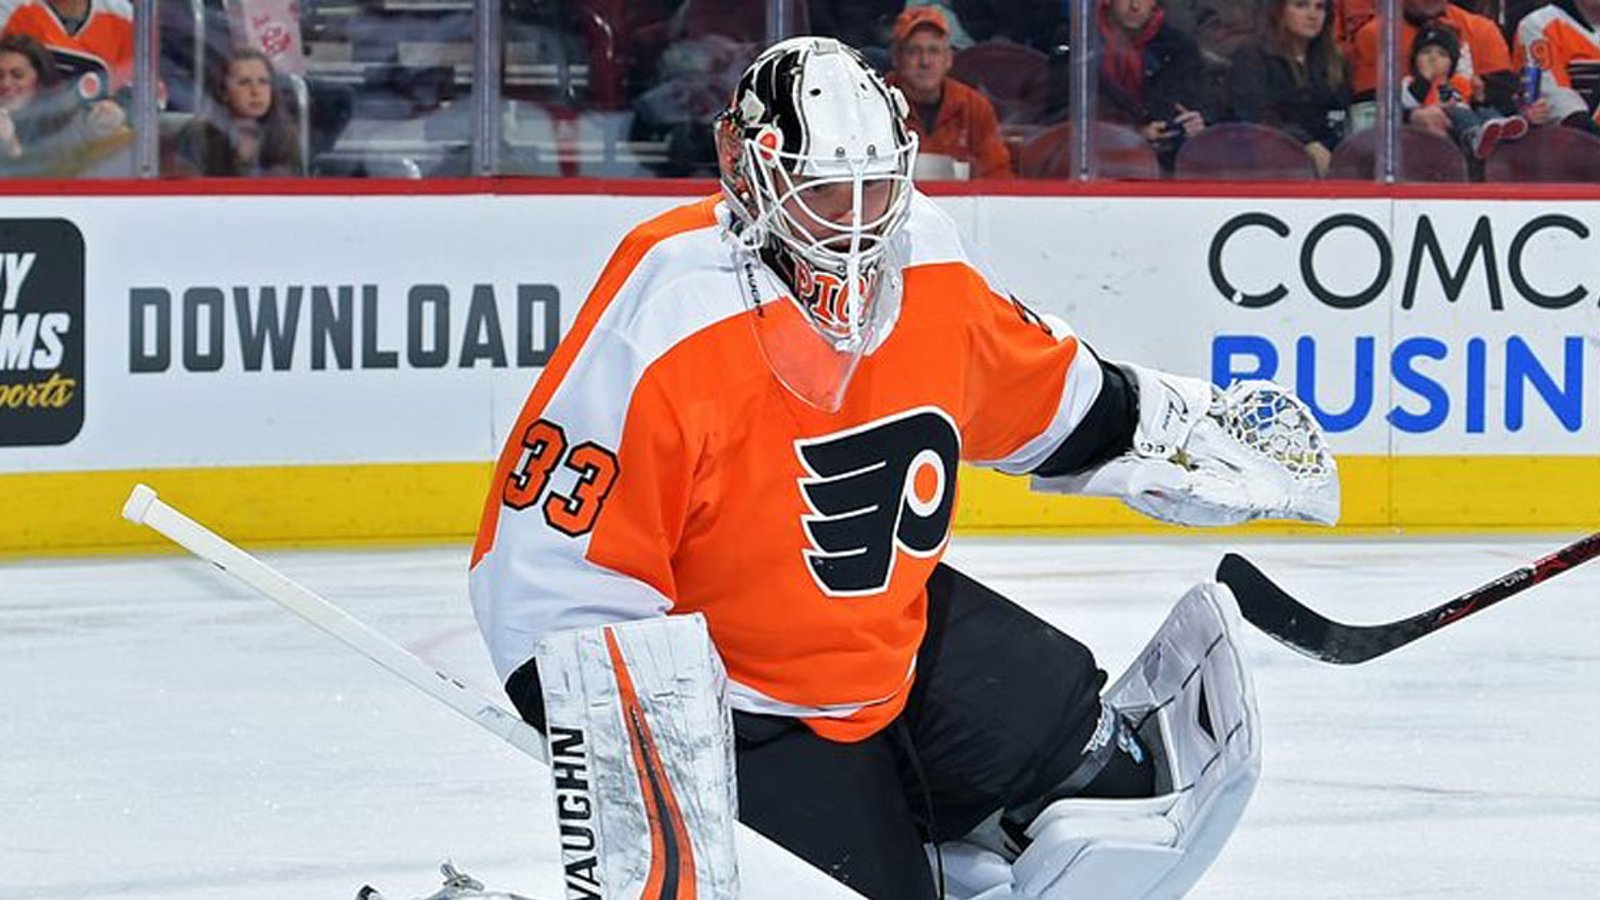 Breaking: Once again, Pickard gets claimed off waivers! 